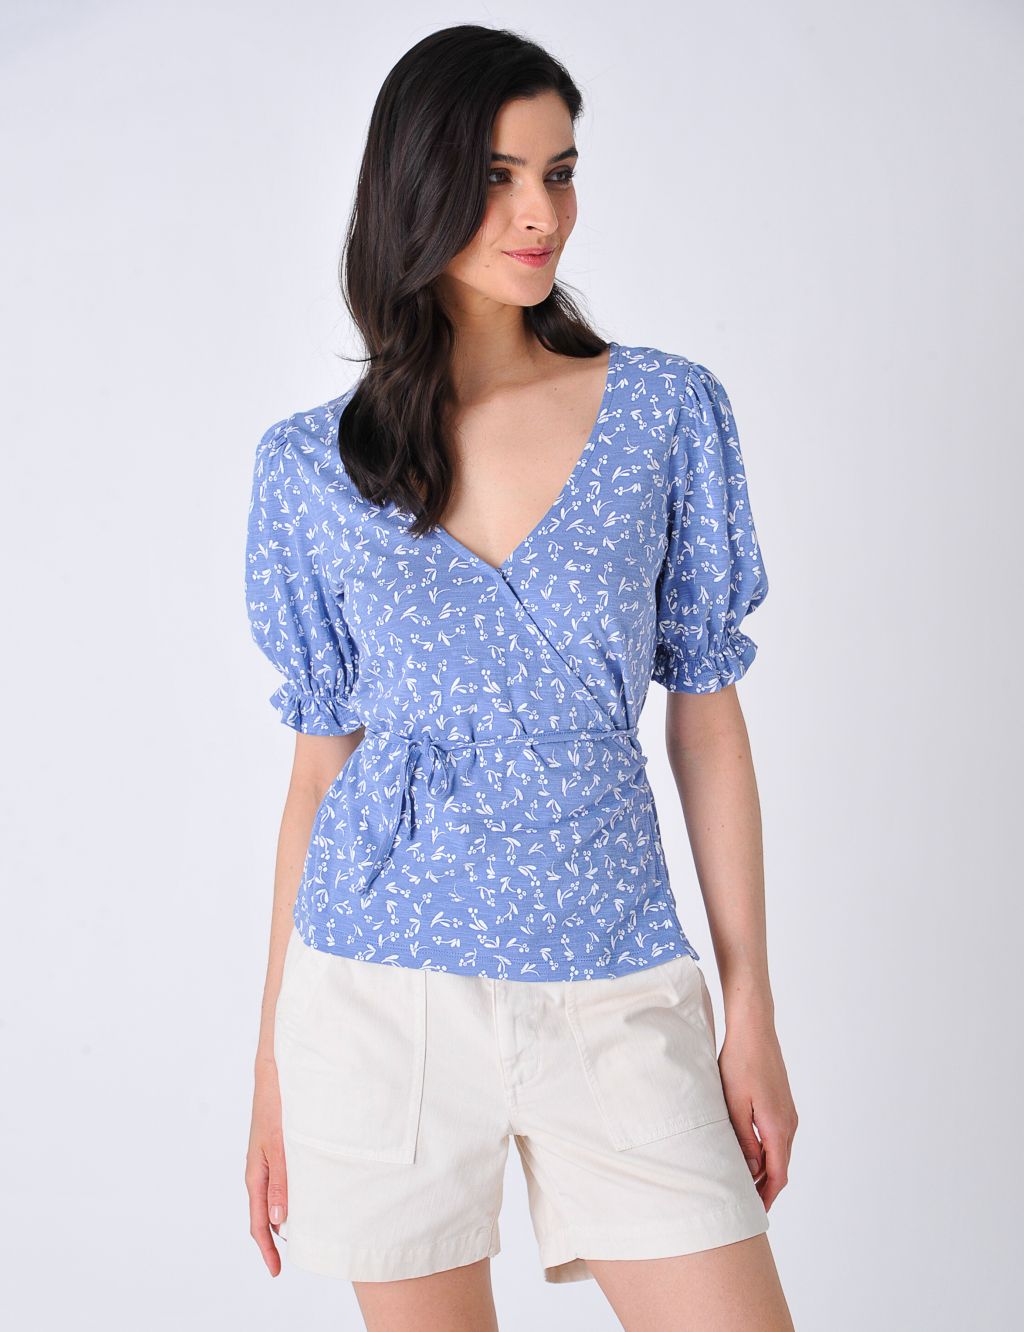 Jersey Floral Frill Detail Wrap Top image 1